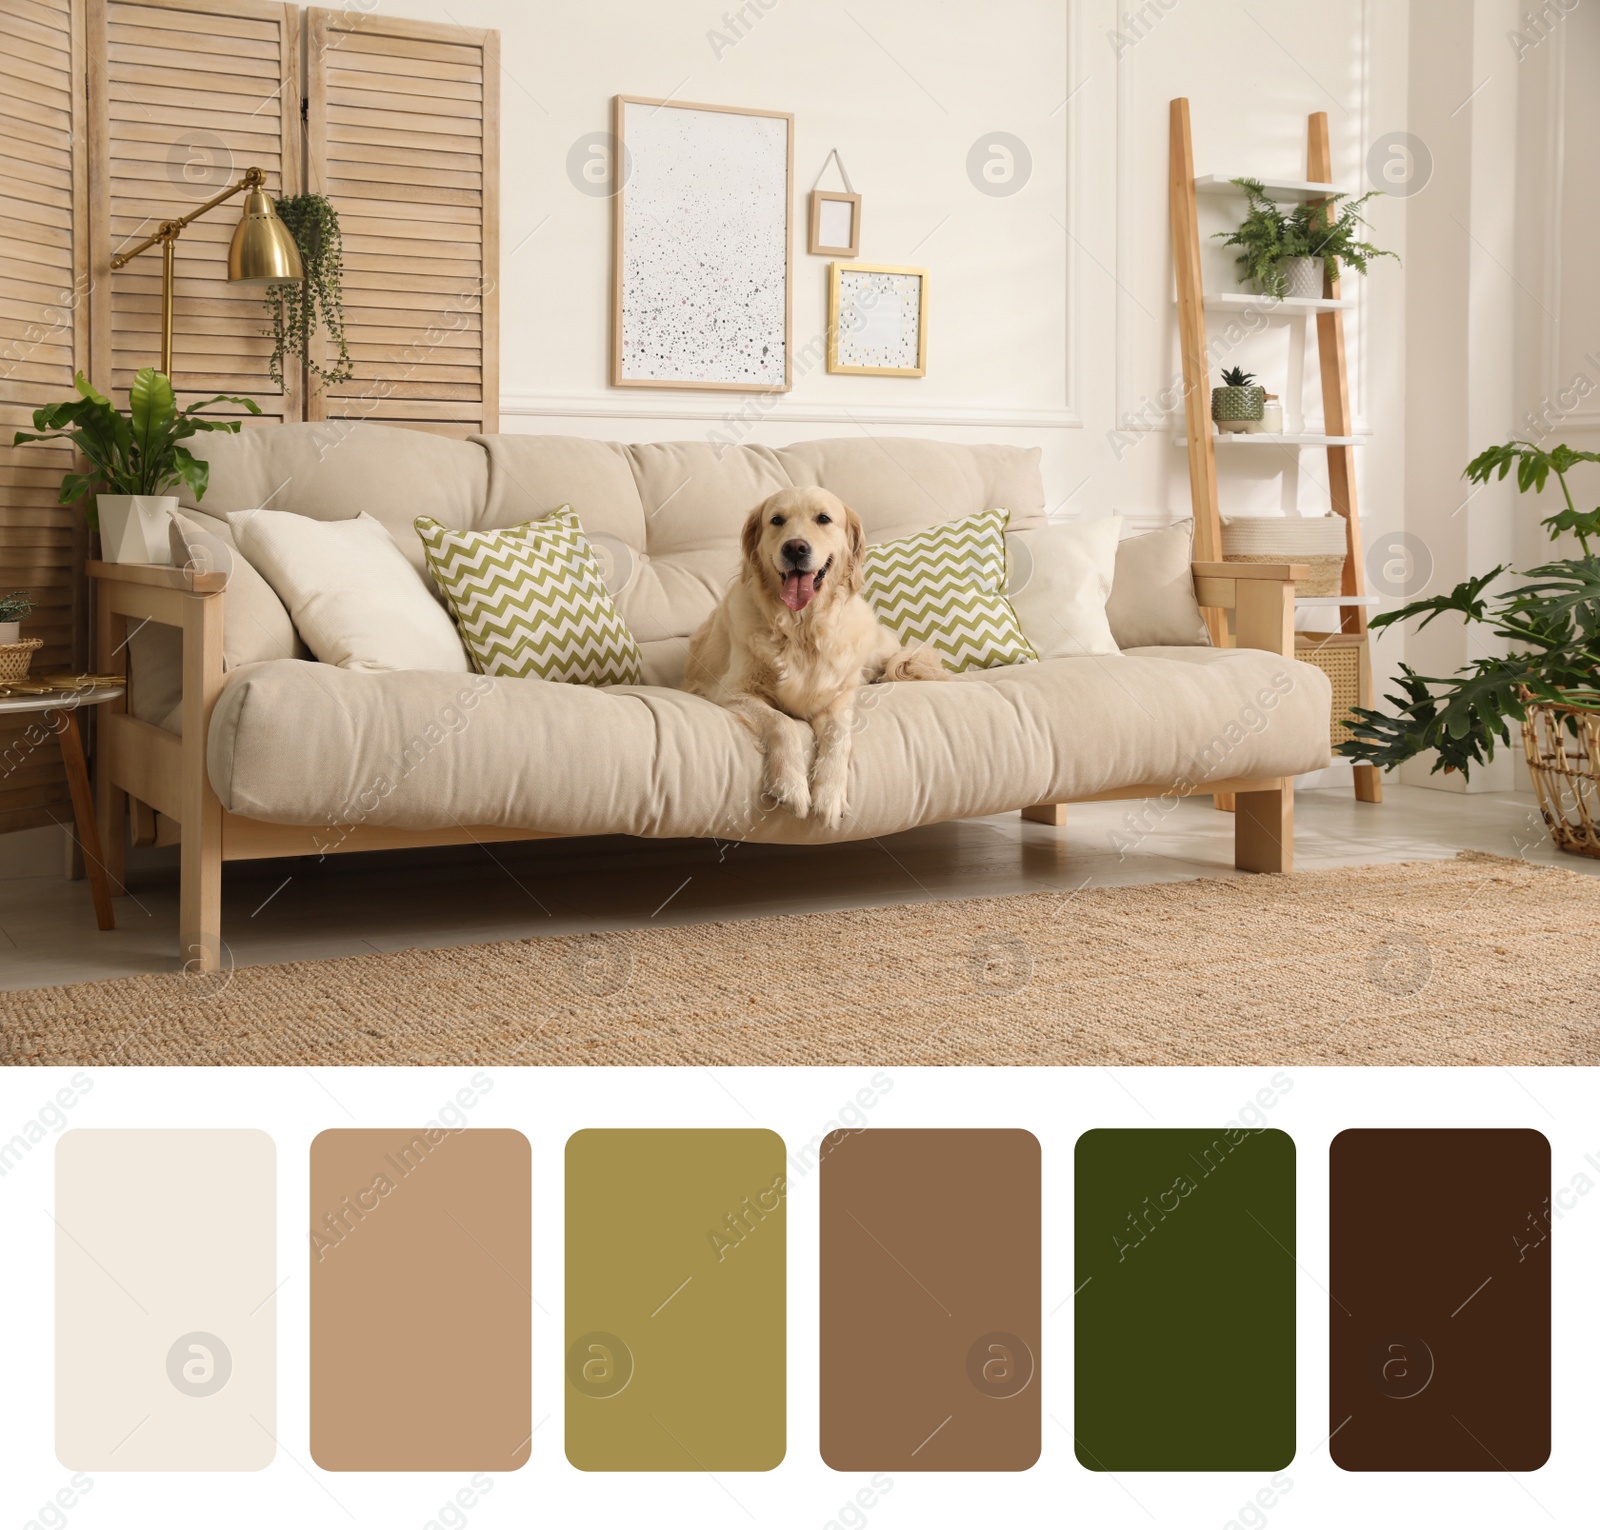 Image of Color palette and photo of adorable dog on sofa in living room. Collage